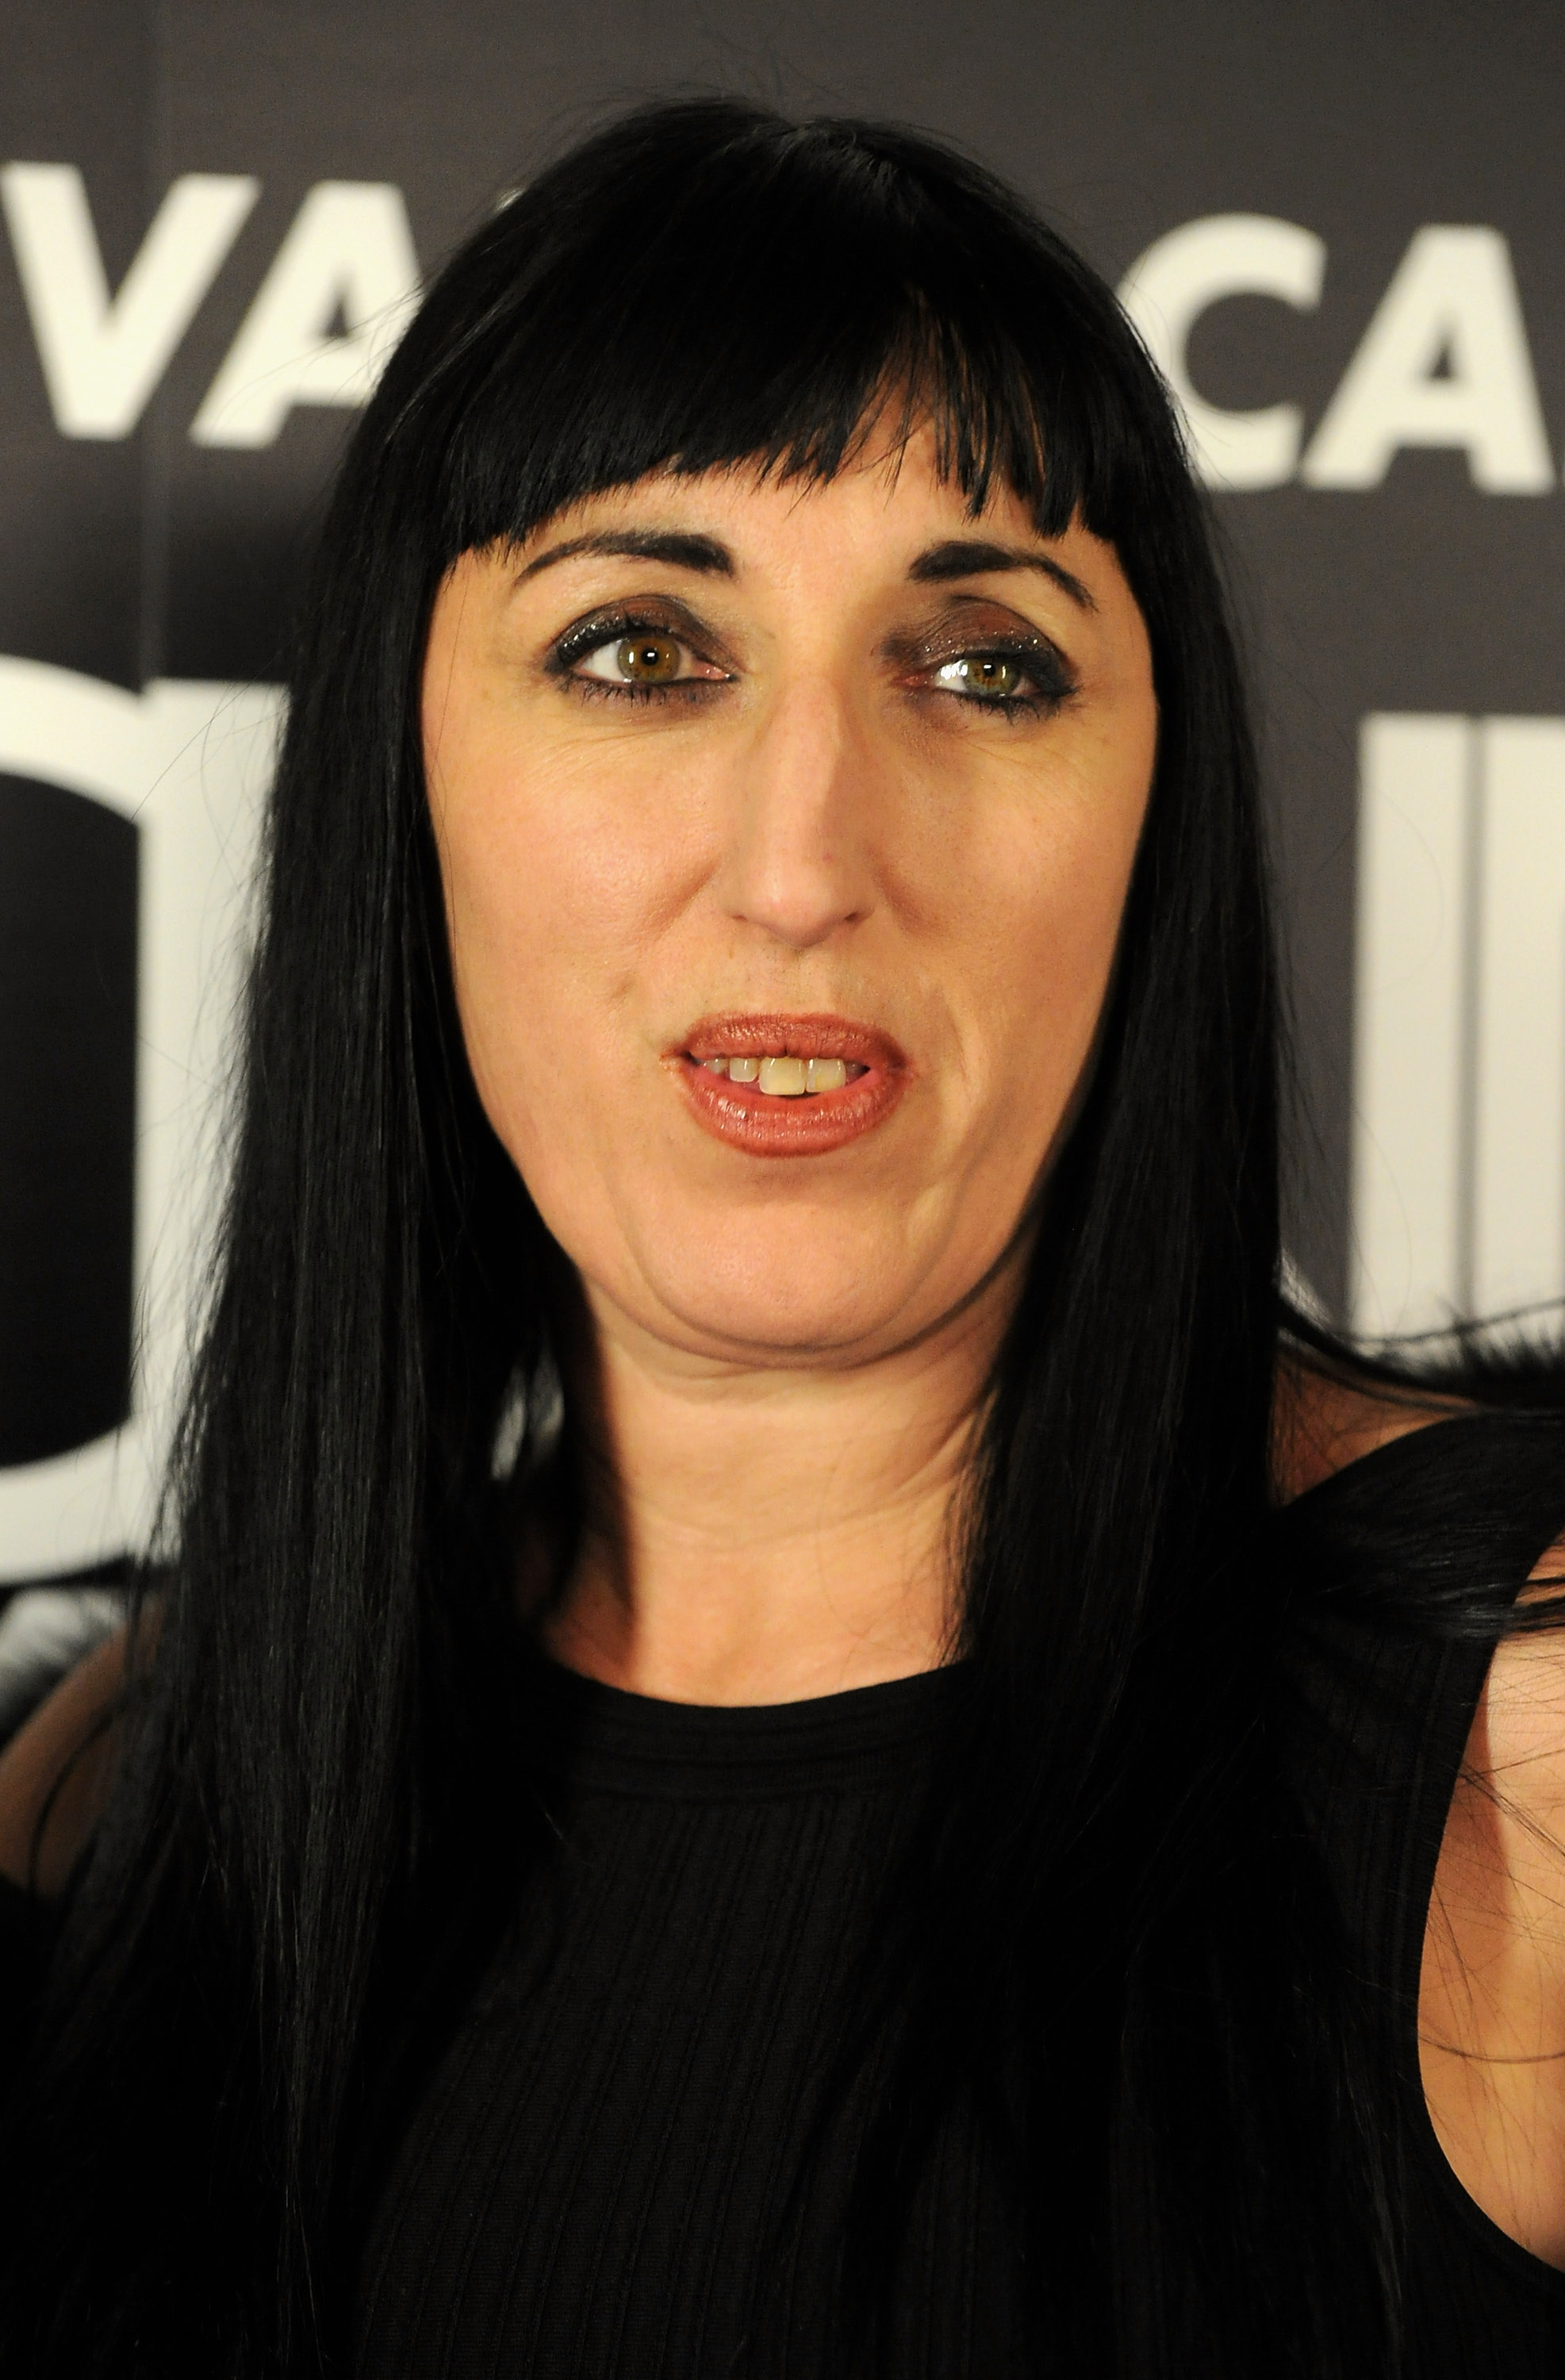 Rossy de Palma at the Corinne Bailey Rae concert at the Shoko Club on February 10, 2010 in Madrid, Spain | Source: Getty Images